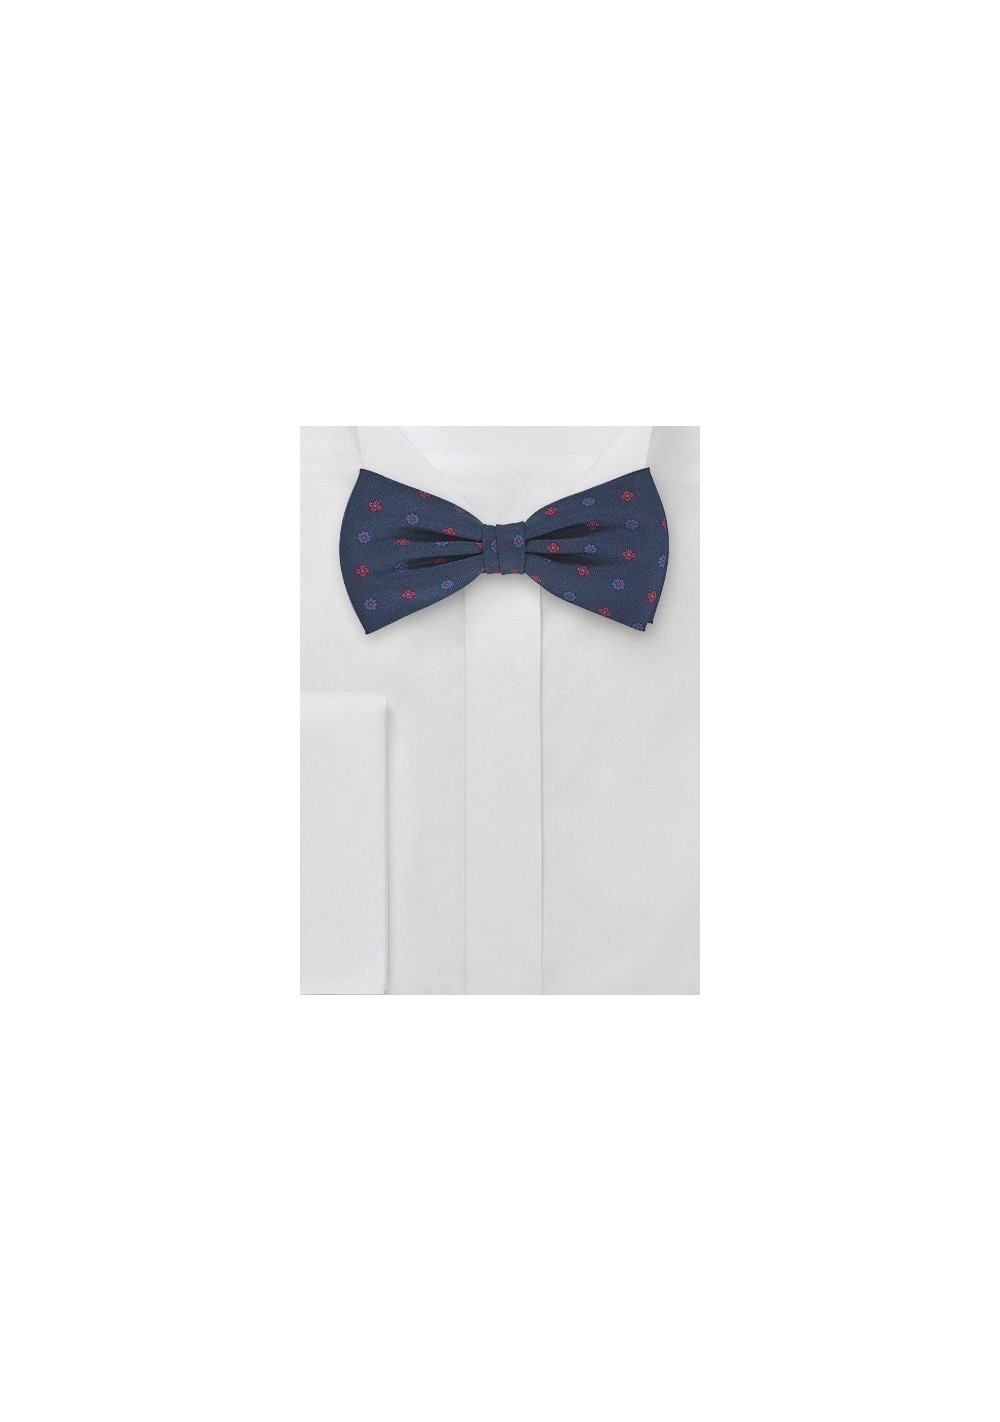 Dapper Bow Tie in Navy and Red